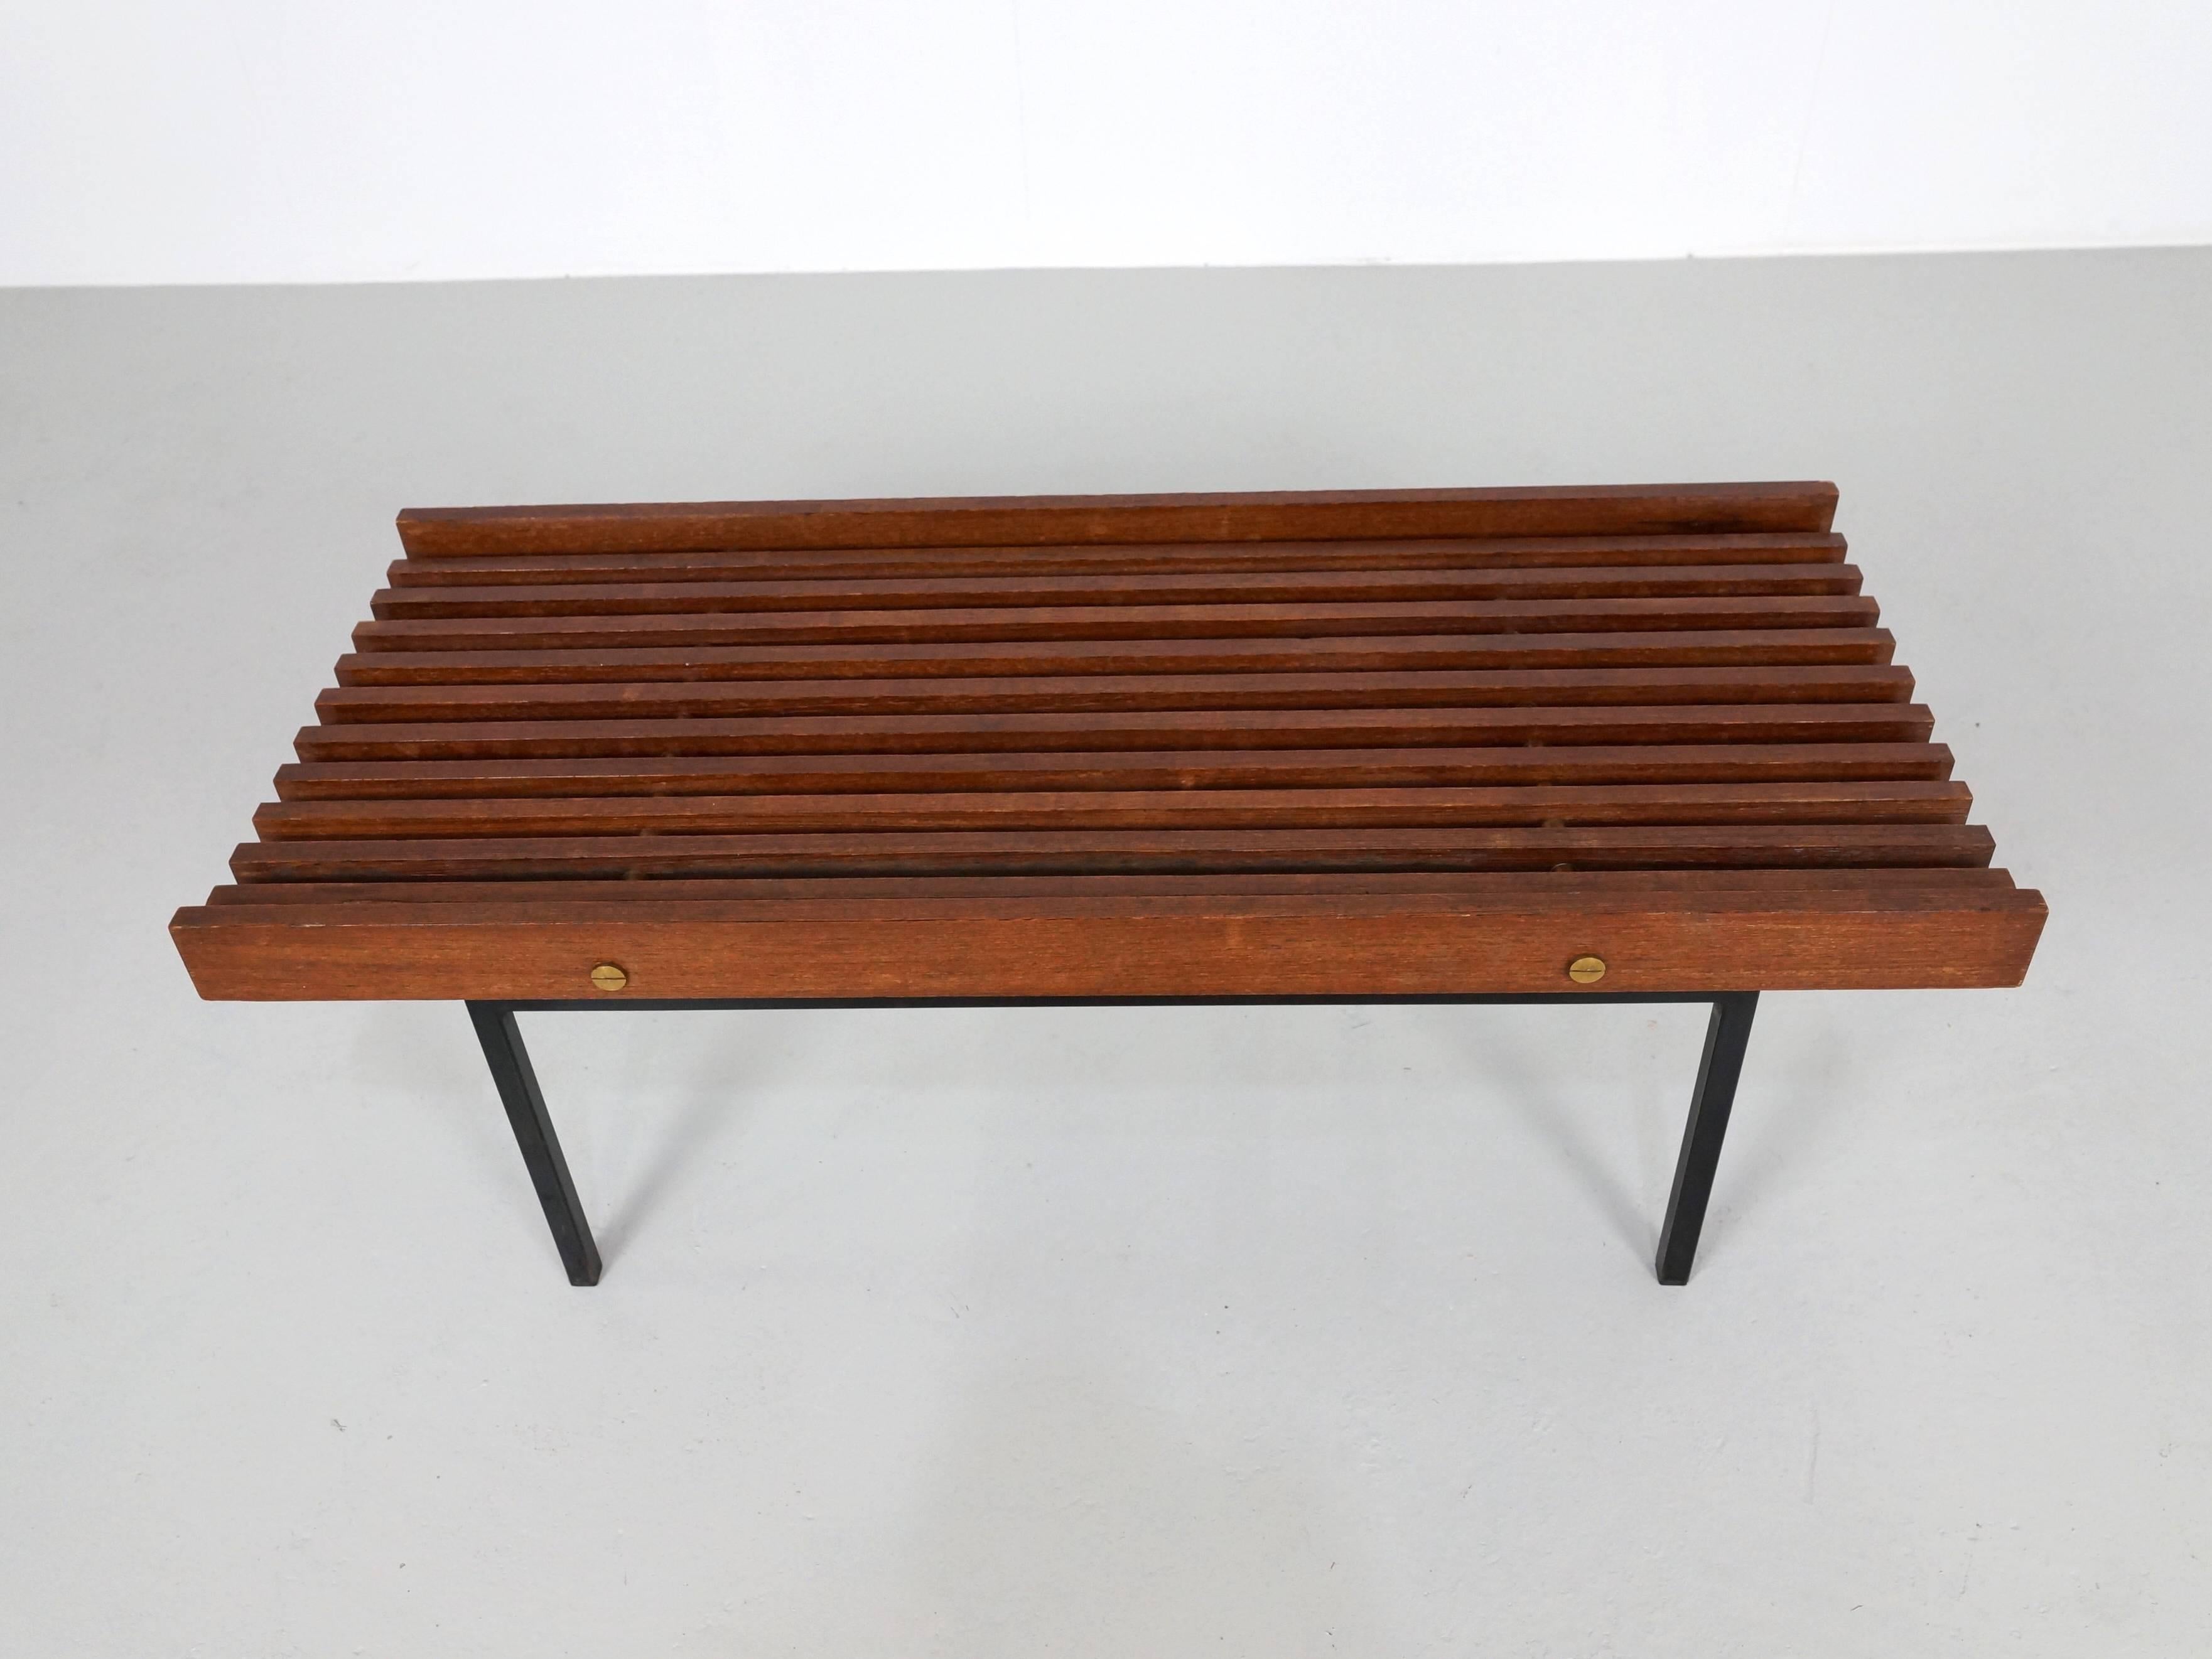 Mid-20th Century Italian Slatted Bench or Side Table in Wenge Wood, with Brass Details